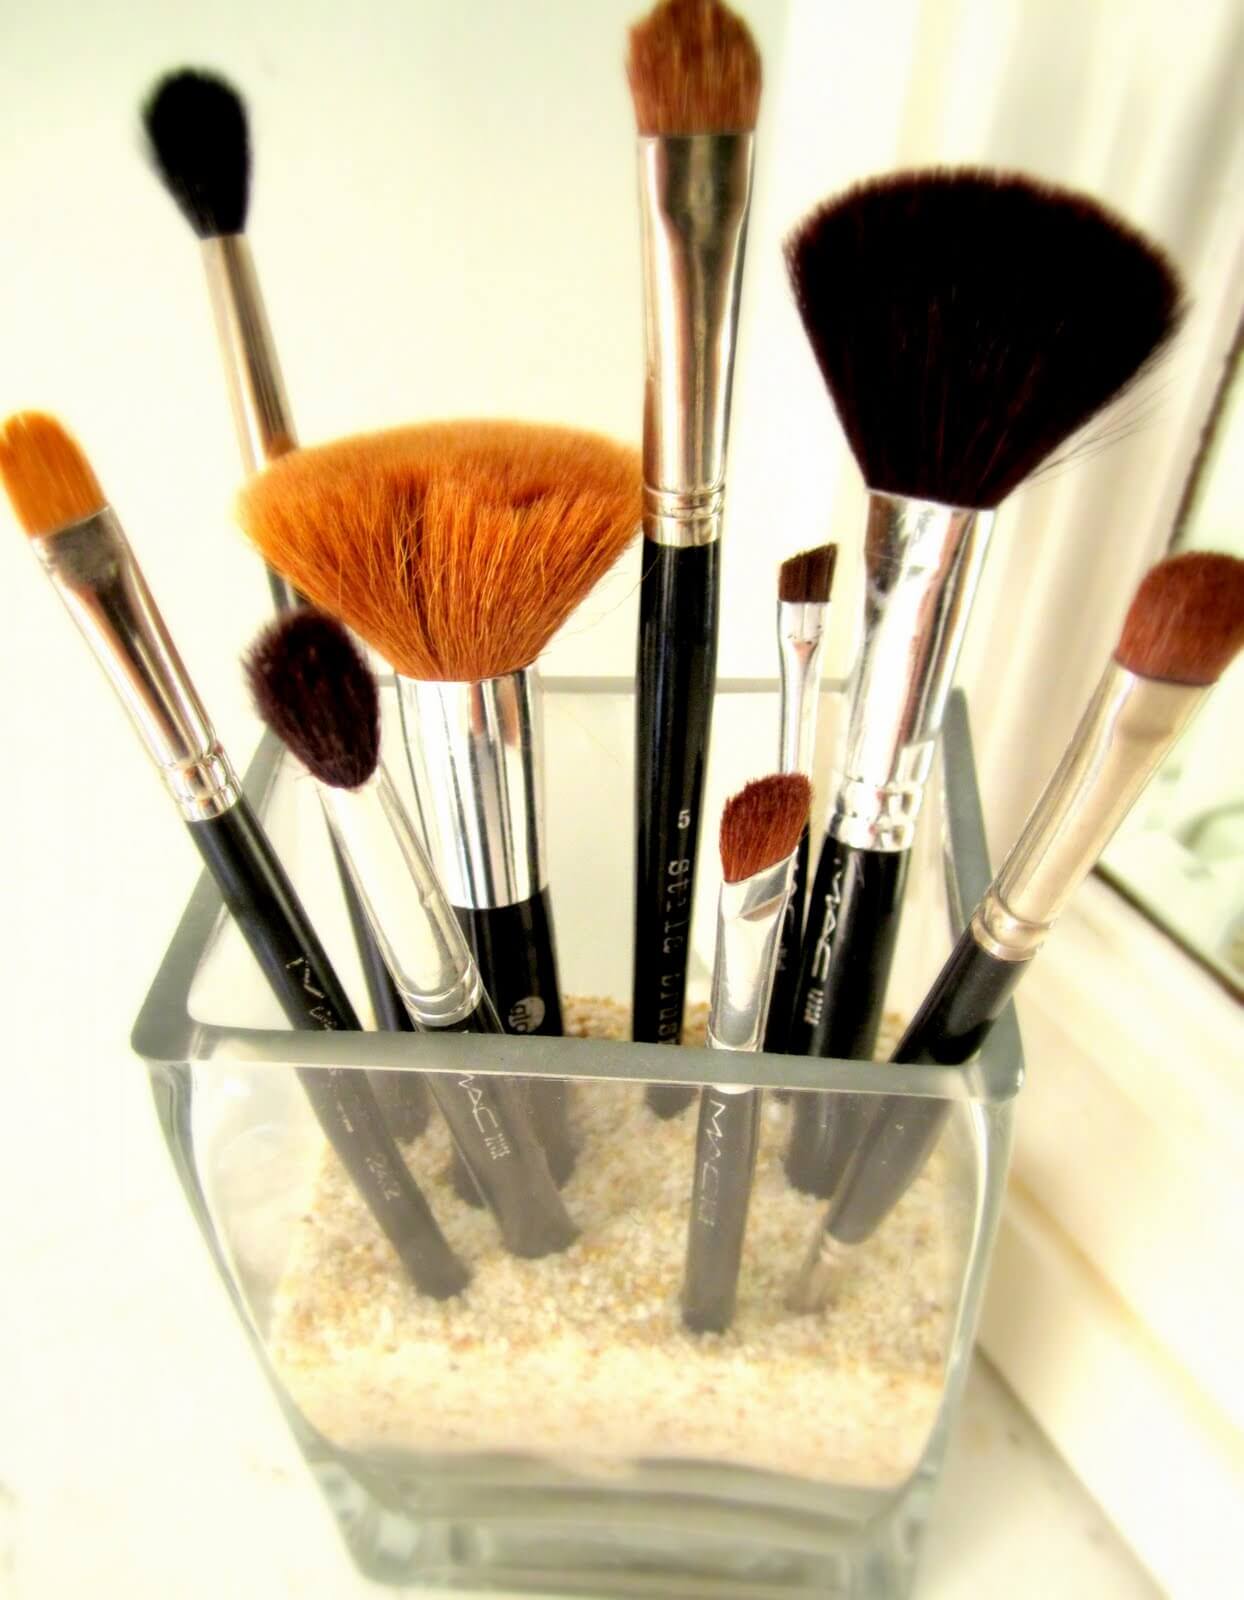 A Pretty Way to Display Makeup Brushes